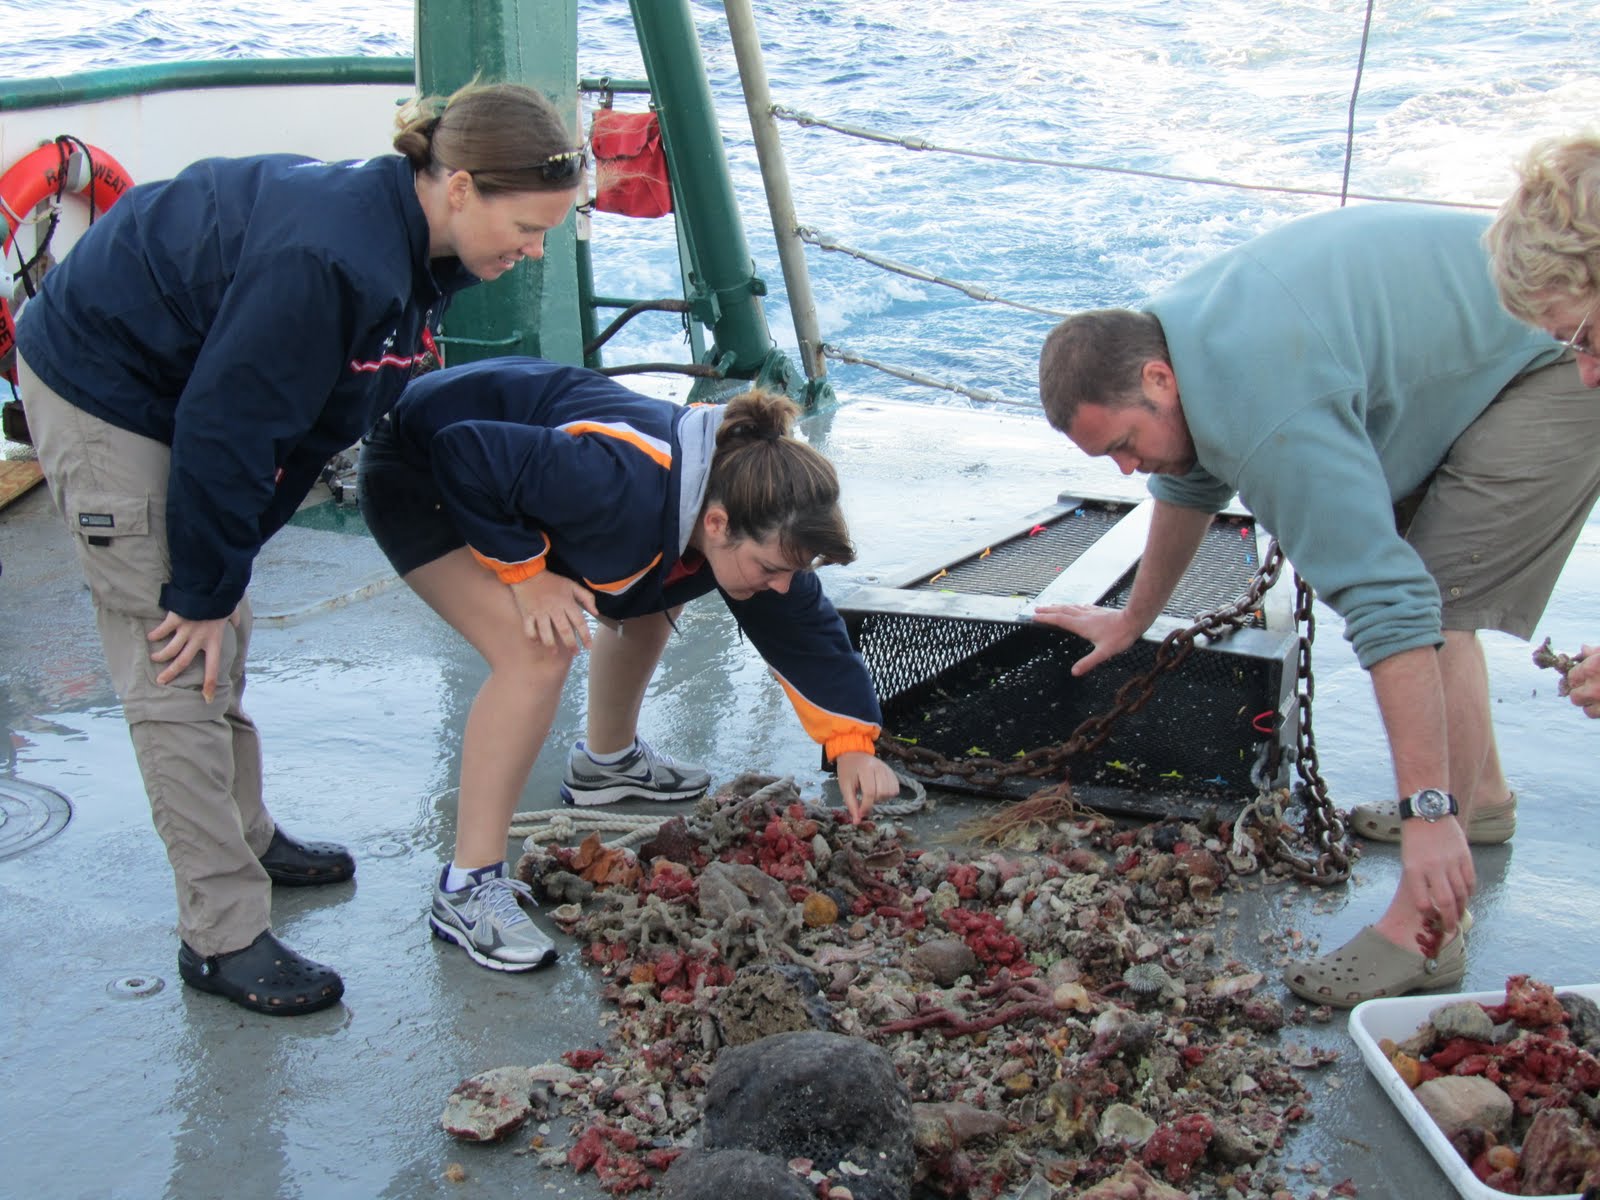 Anna, Brendan, and Nicole looking over a pile of sponges on the boat deck